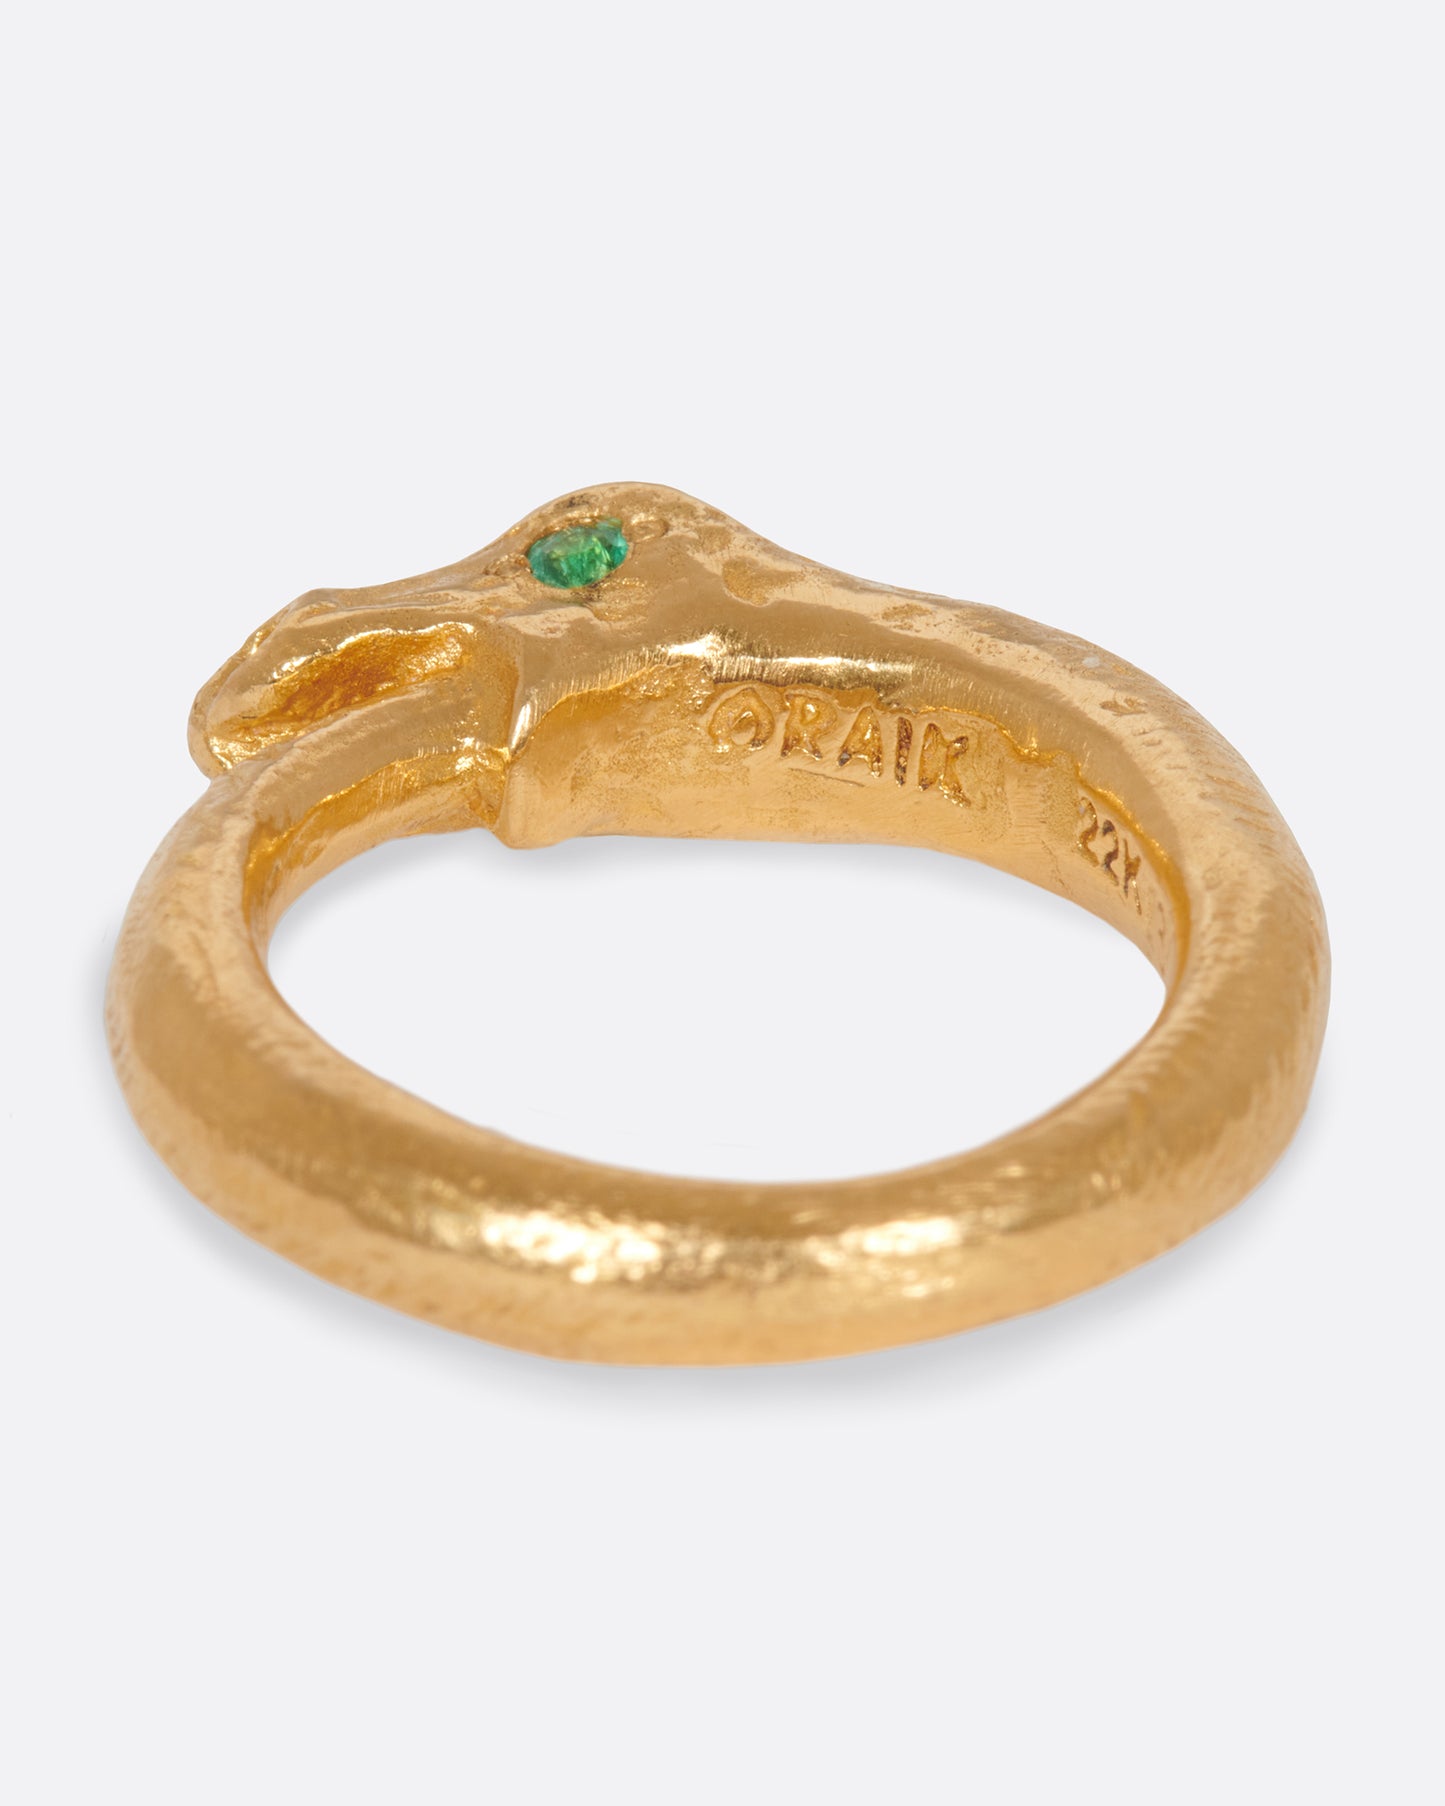 A high karat gold ouroboros ring showing a serpent catching its own tail.